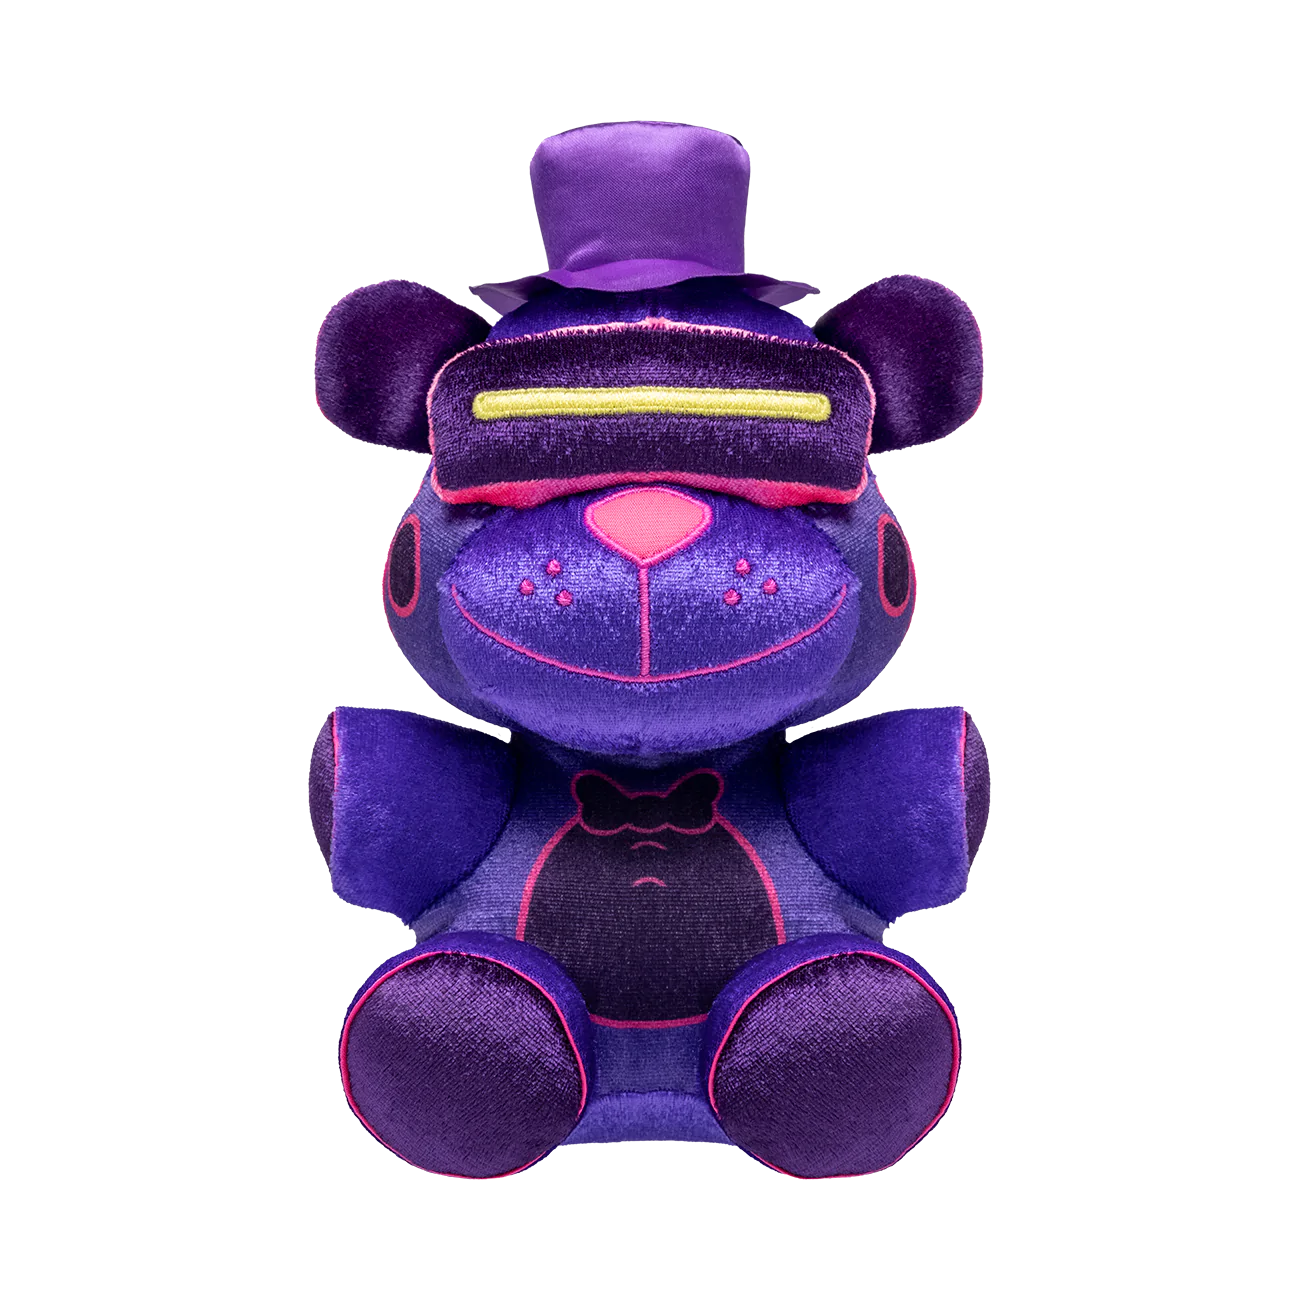 Most Expensive Fnaf Funko, and most expensive plushie. : r/funkopop